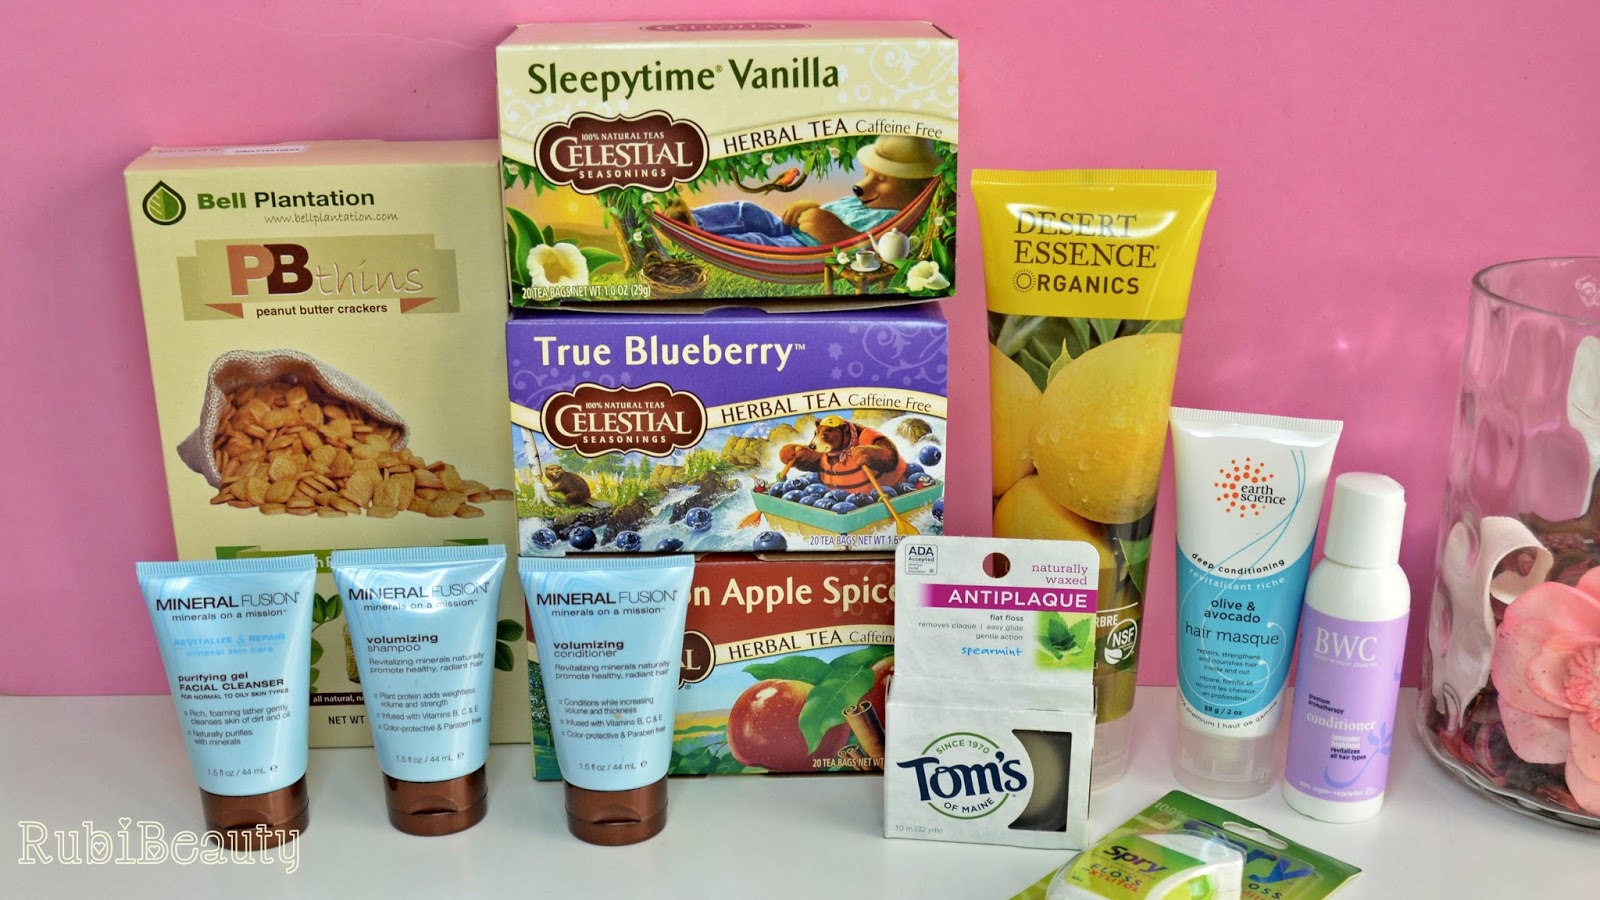 iherb haul review impresiones opinion compras